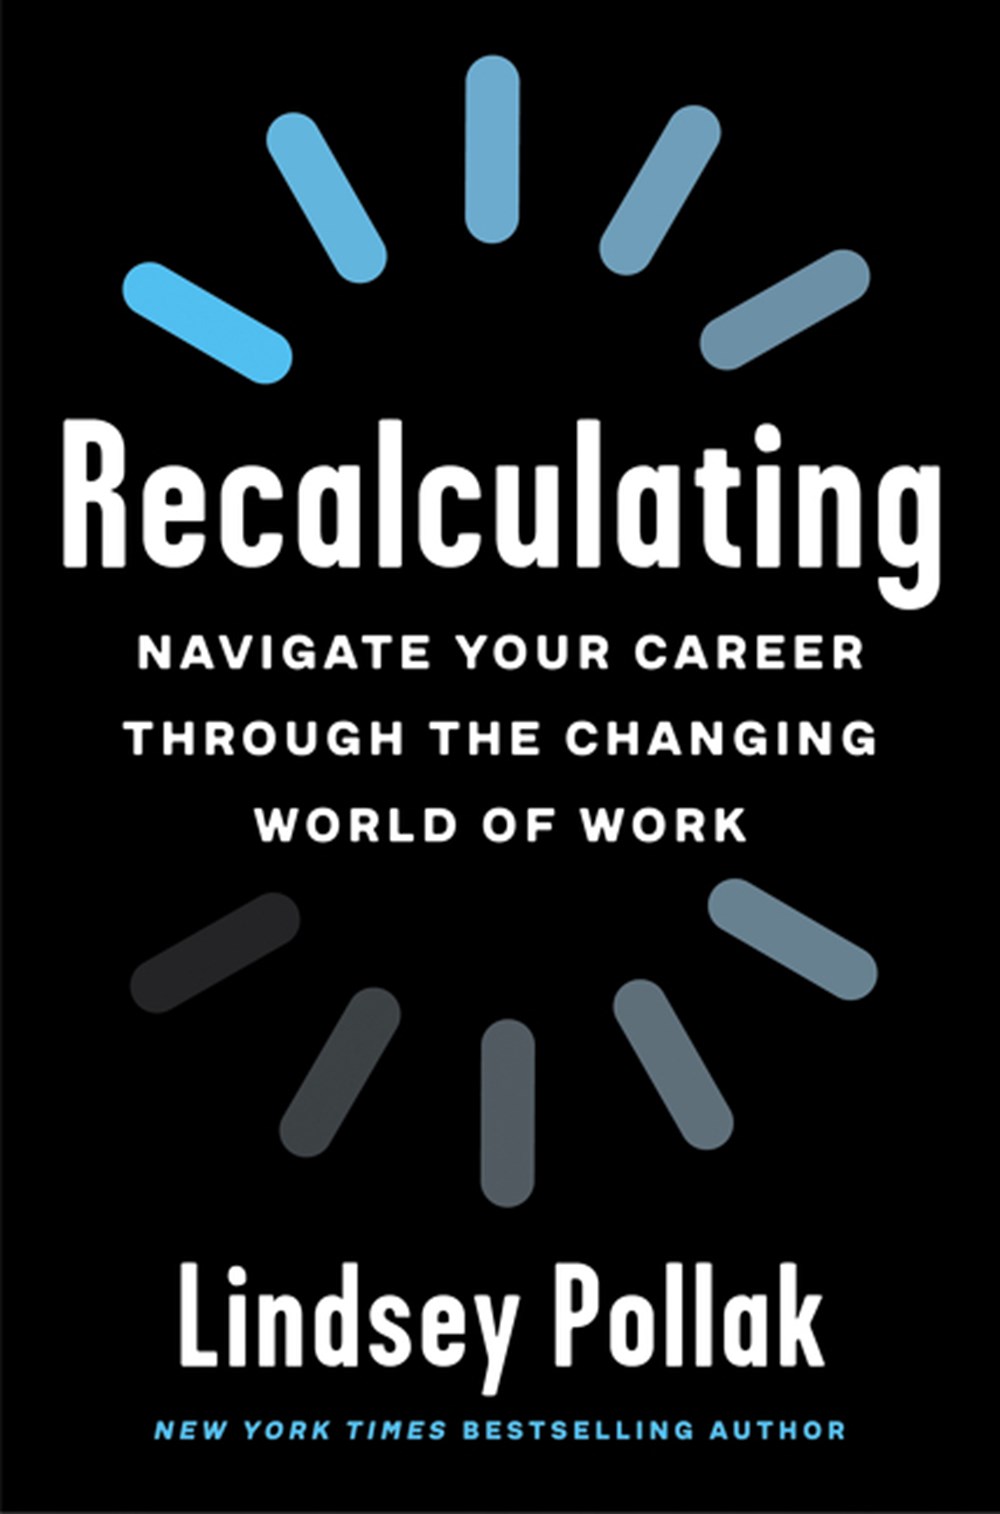 Recalculating Navigate Your Career Through the Changing World of Work